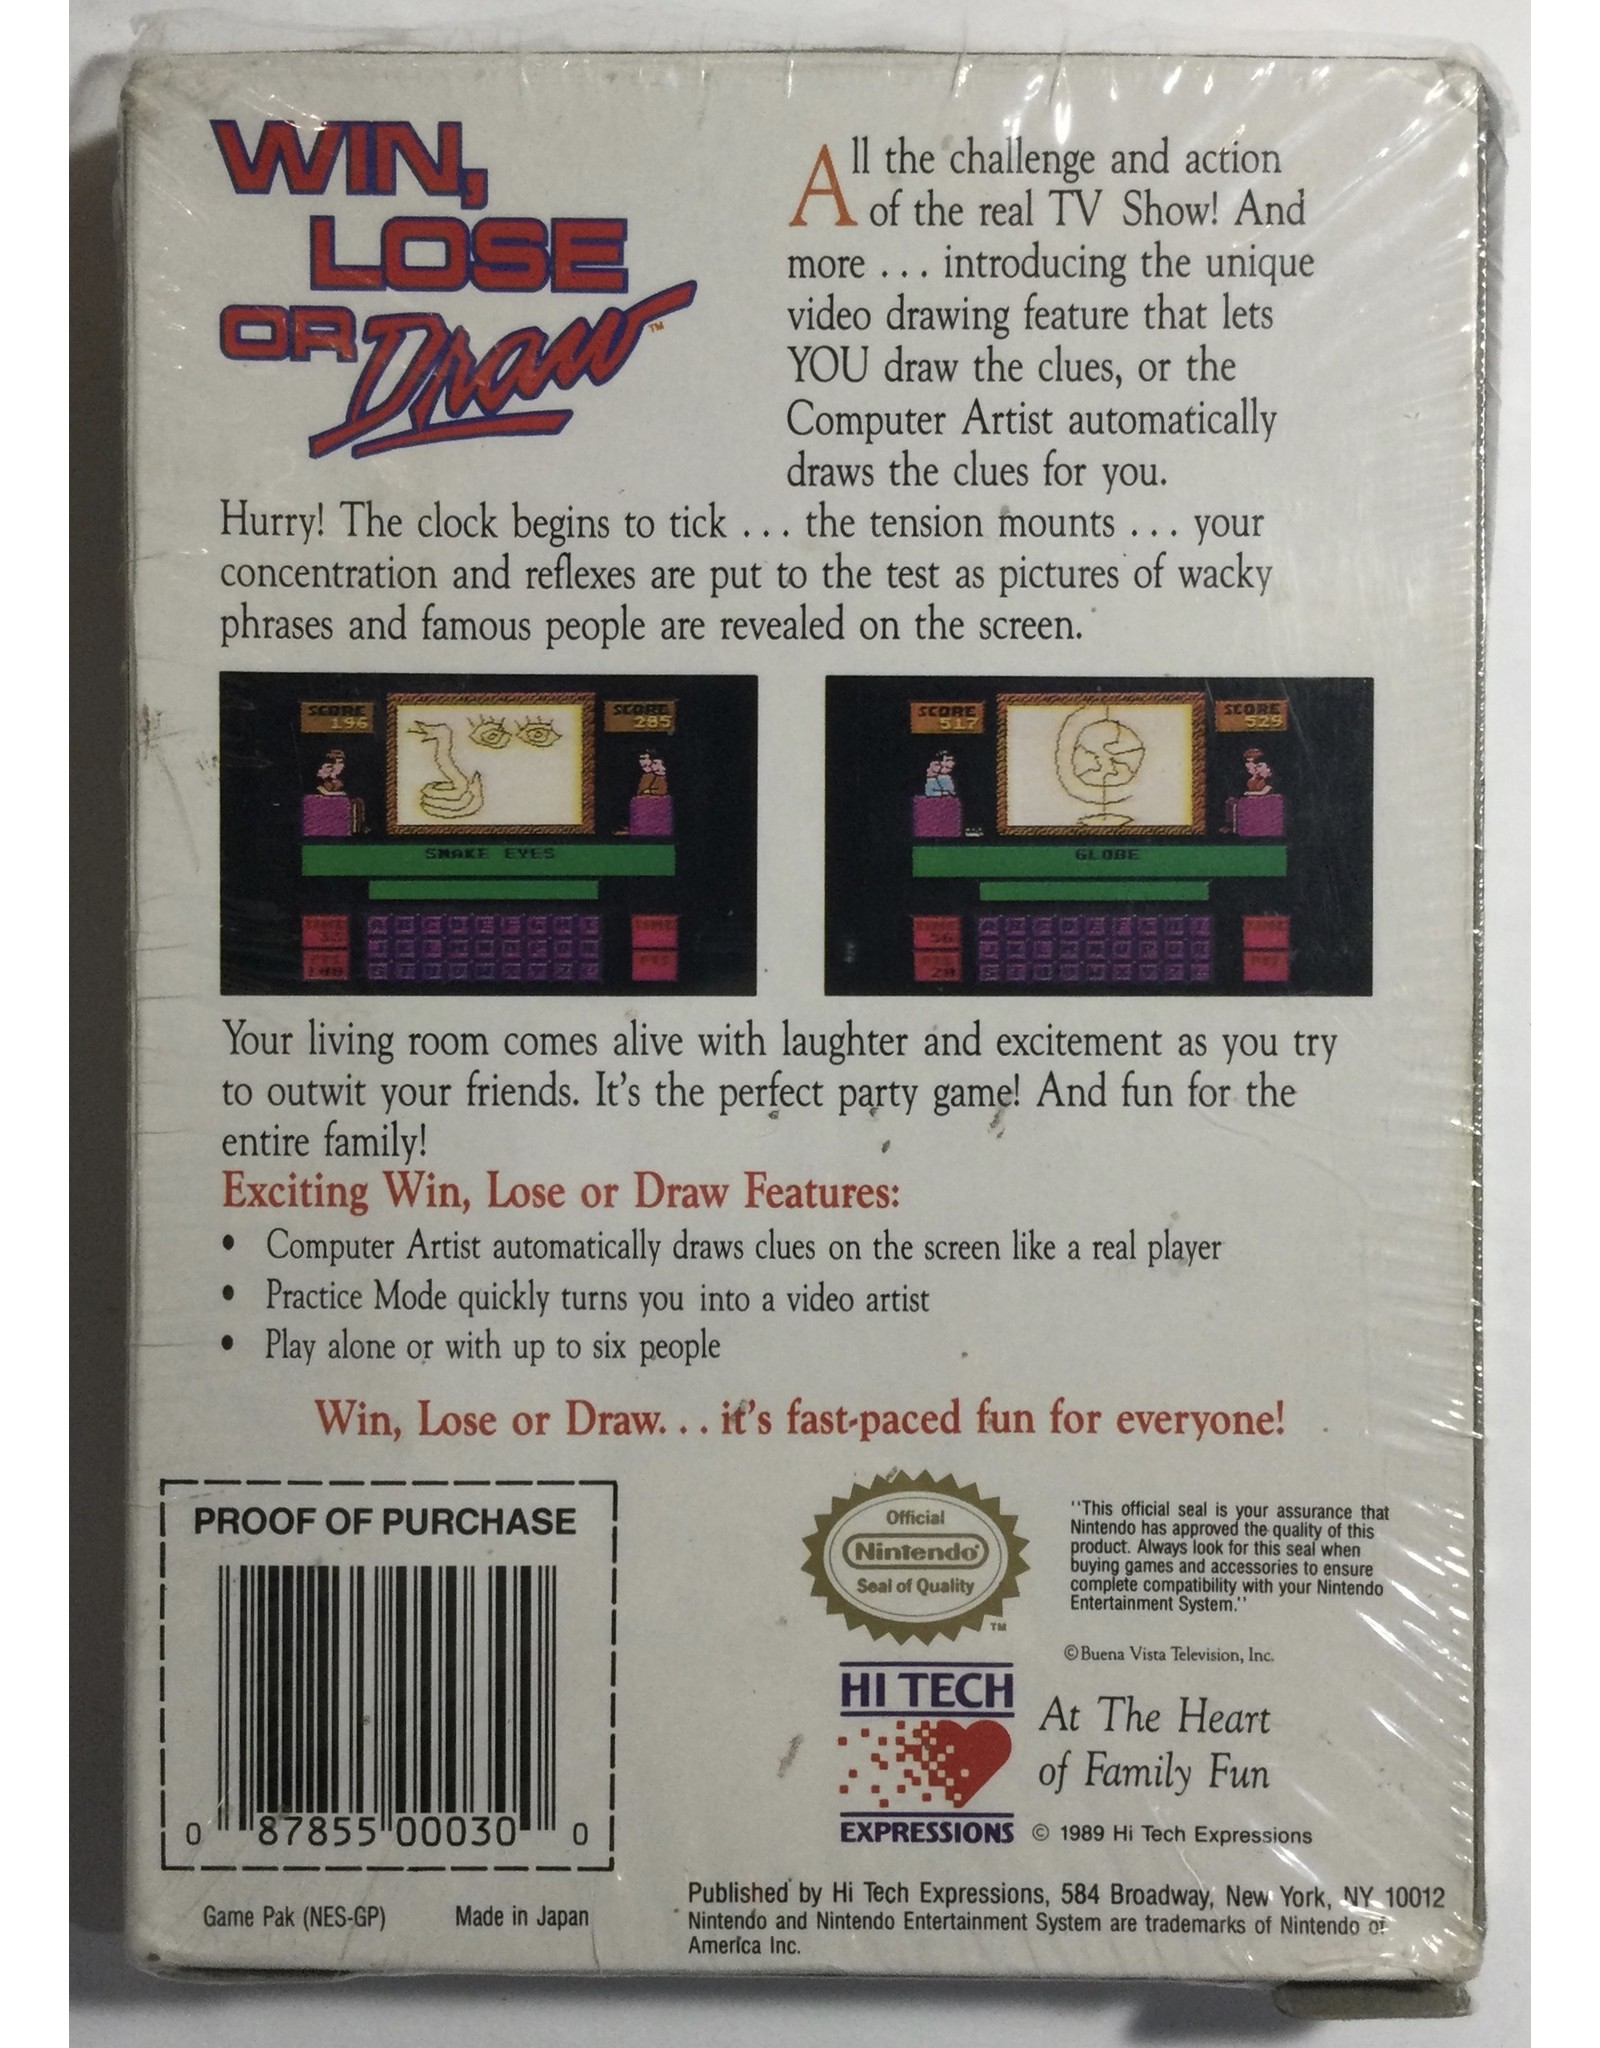 HI TECH EXPRESSIONS Win, Lose or Draw for Nintendo Entertainment System (NES)